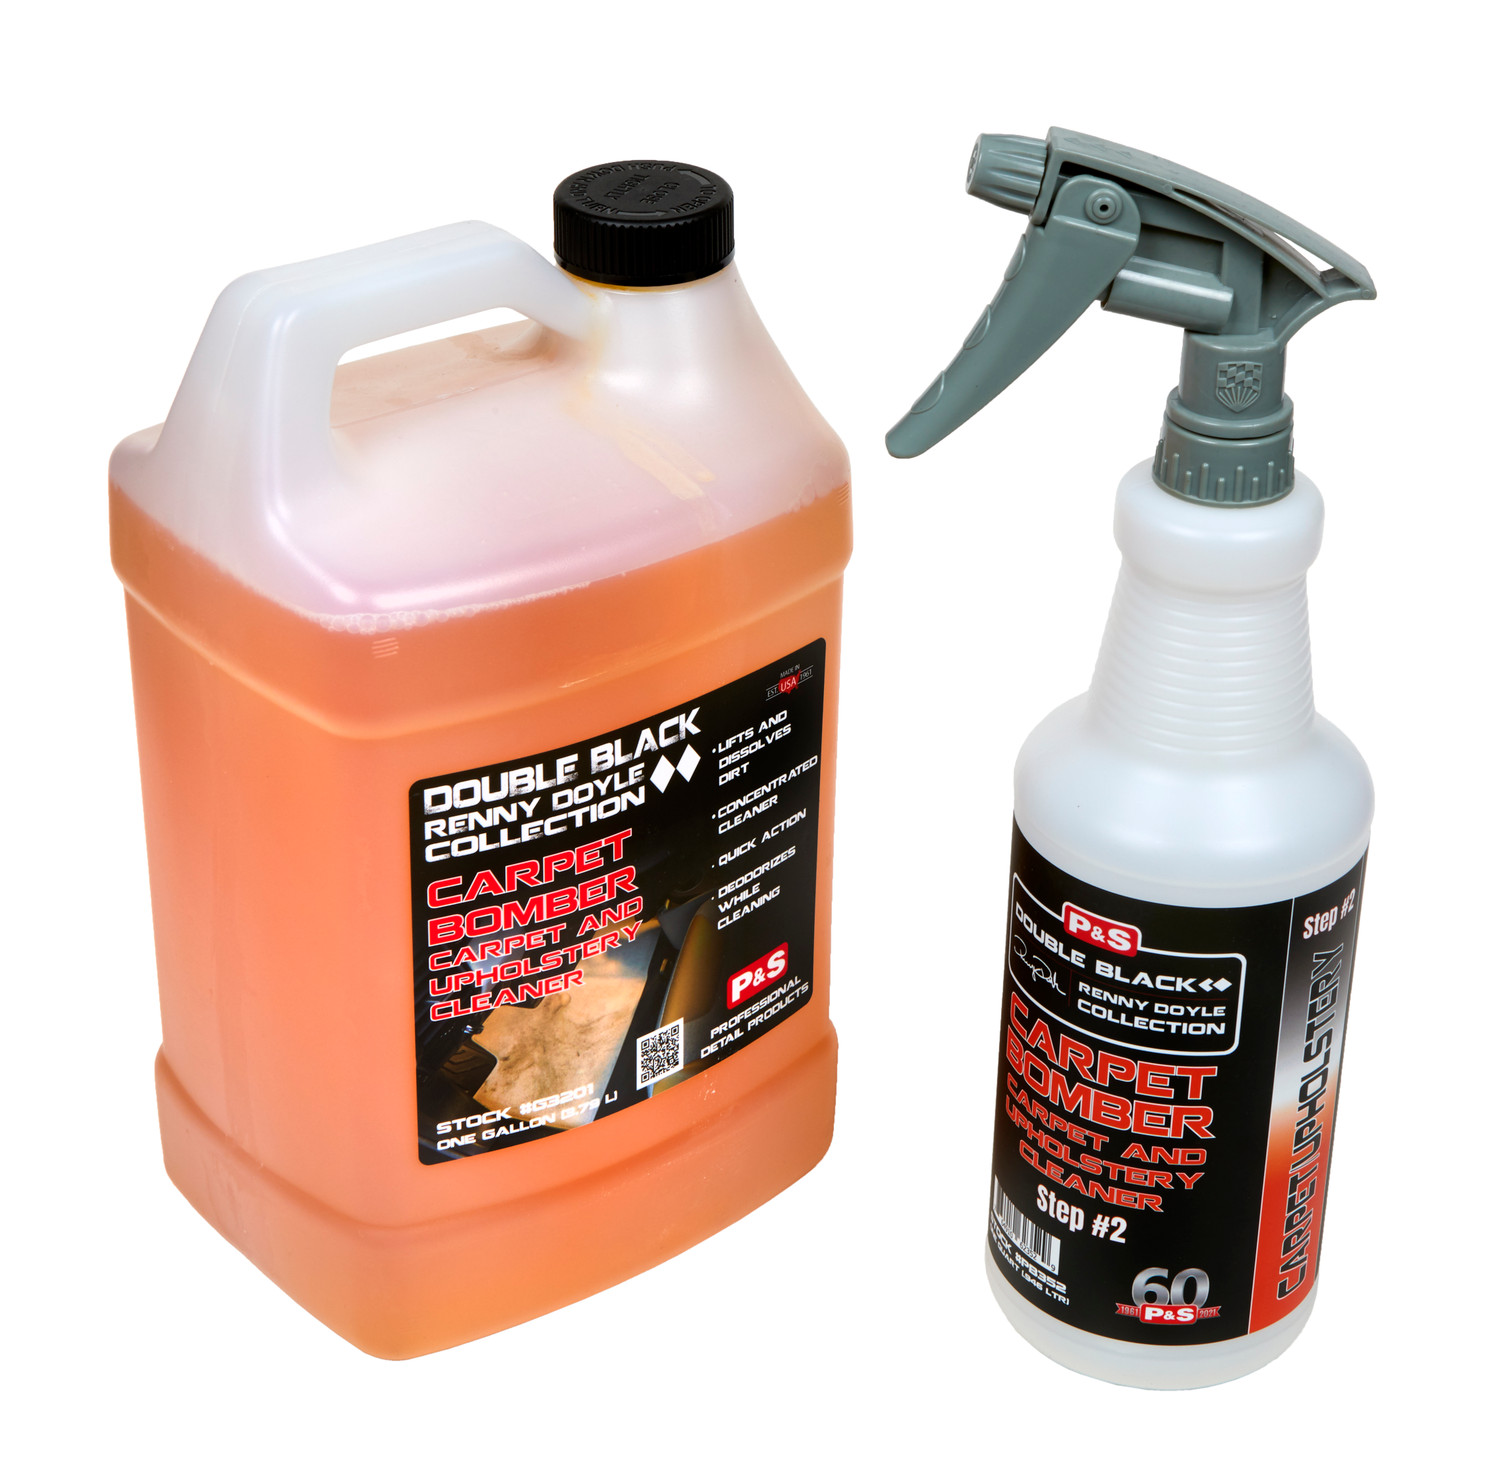 P&S Carpet Bomber Carpet and Upholstery Cleaner – Inspire Car Care